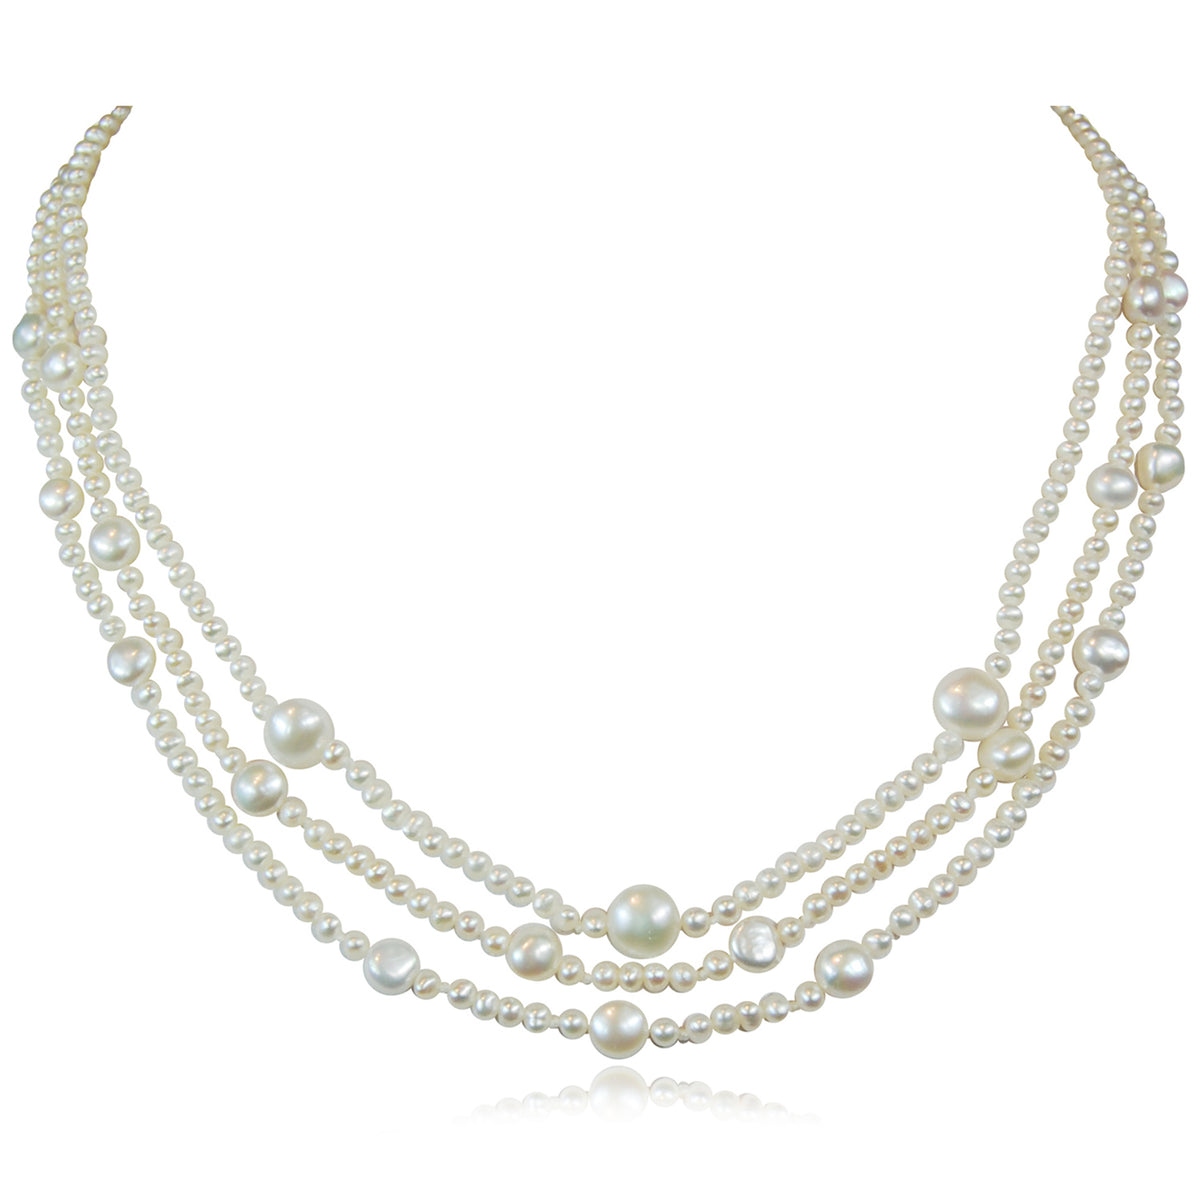 White Freshwater Pearl Triple Strand Necklace (Limited Edition)